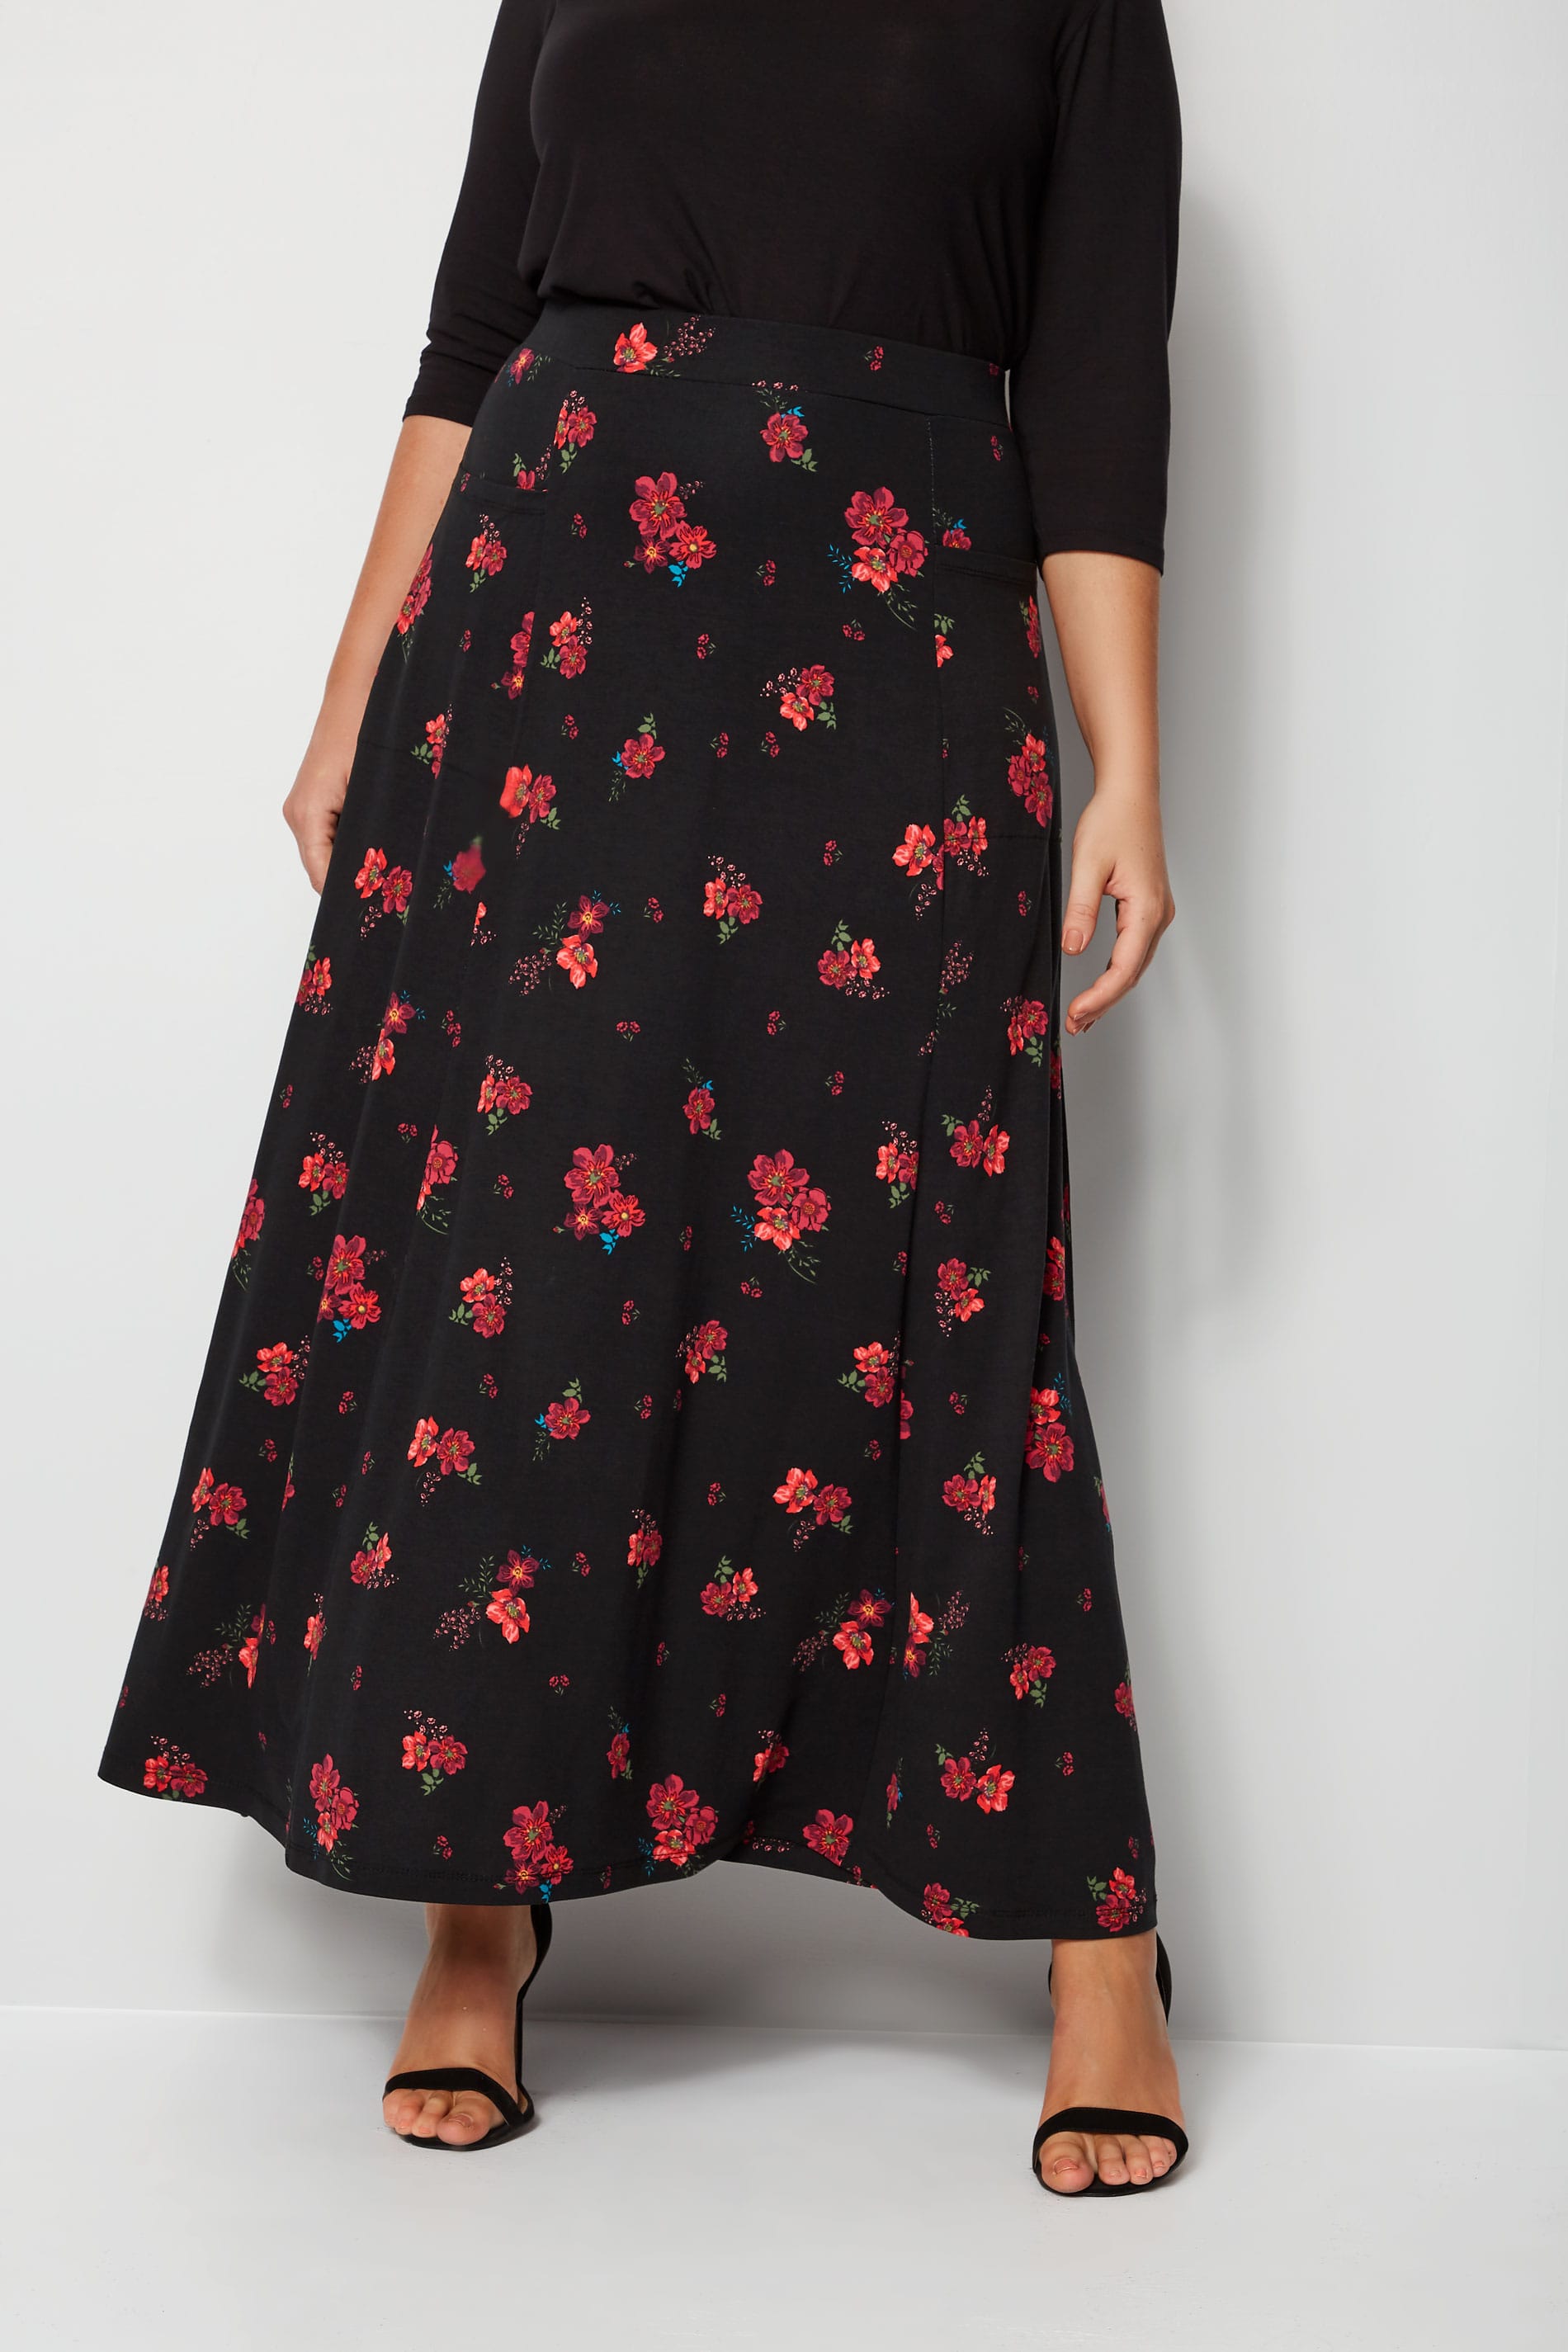 Black & Red Floral Maxi Skirt With Pockets, Plus size 16 to 36 | Yours ...